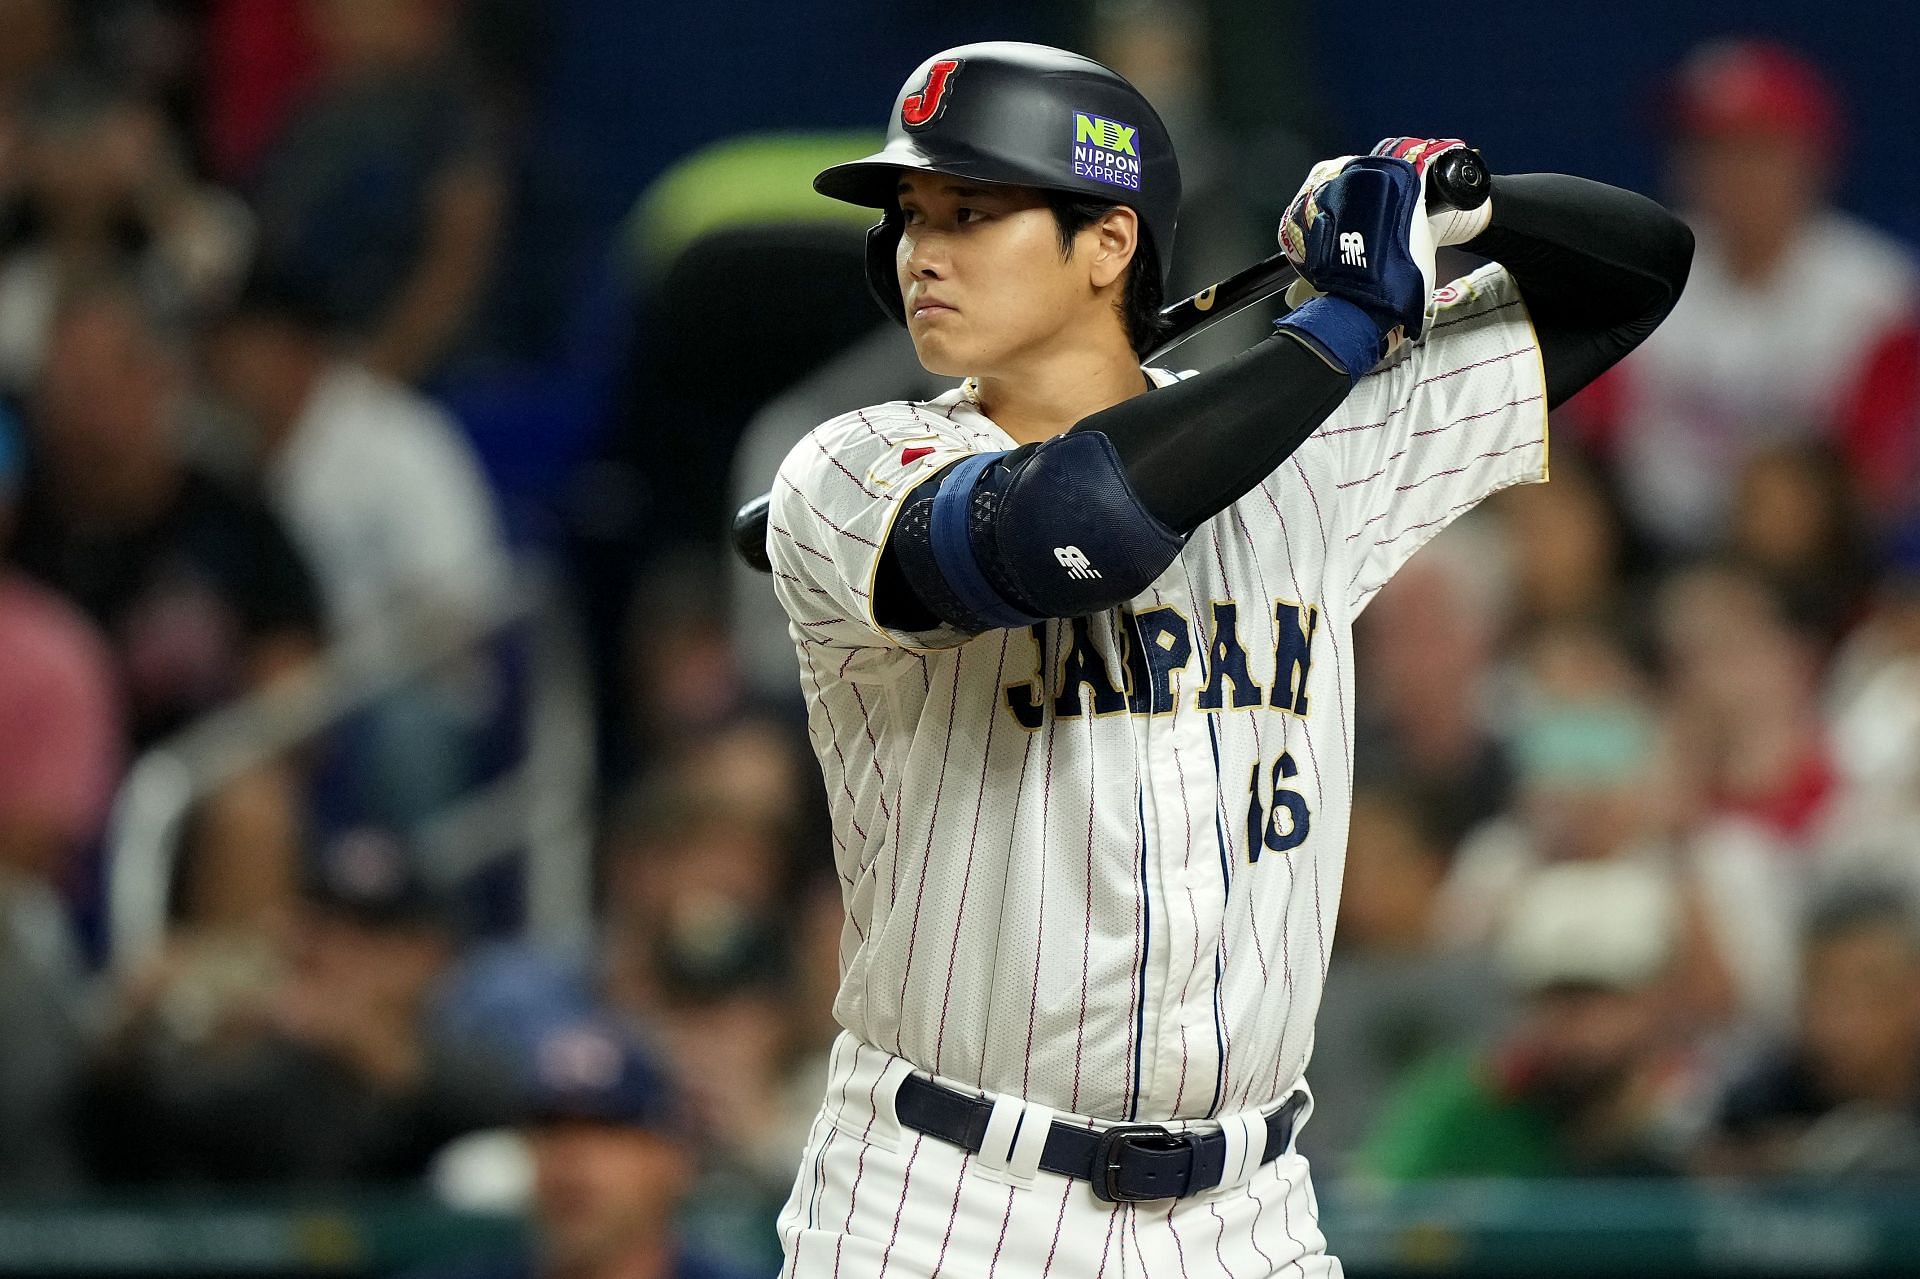 Shohei Ohtani of Team Japan at bat against Team USA during the World Baseball Classic Championship at loanDepot park